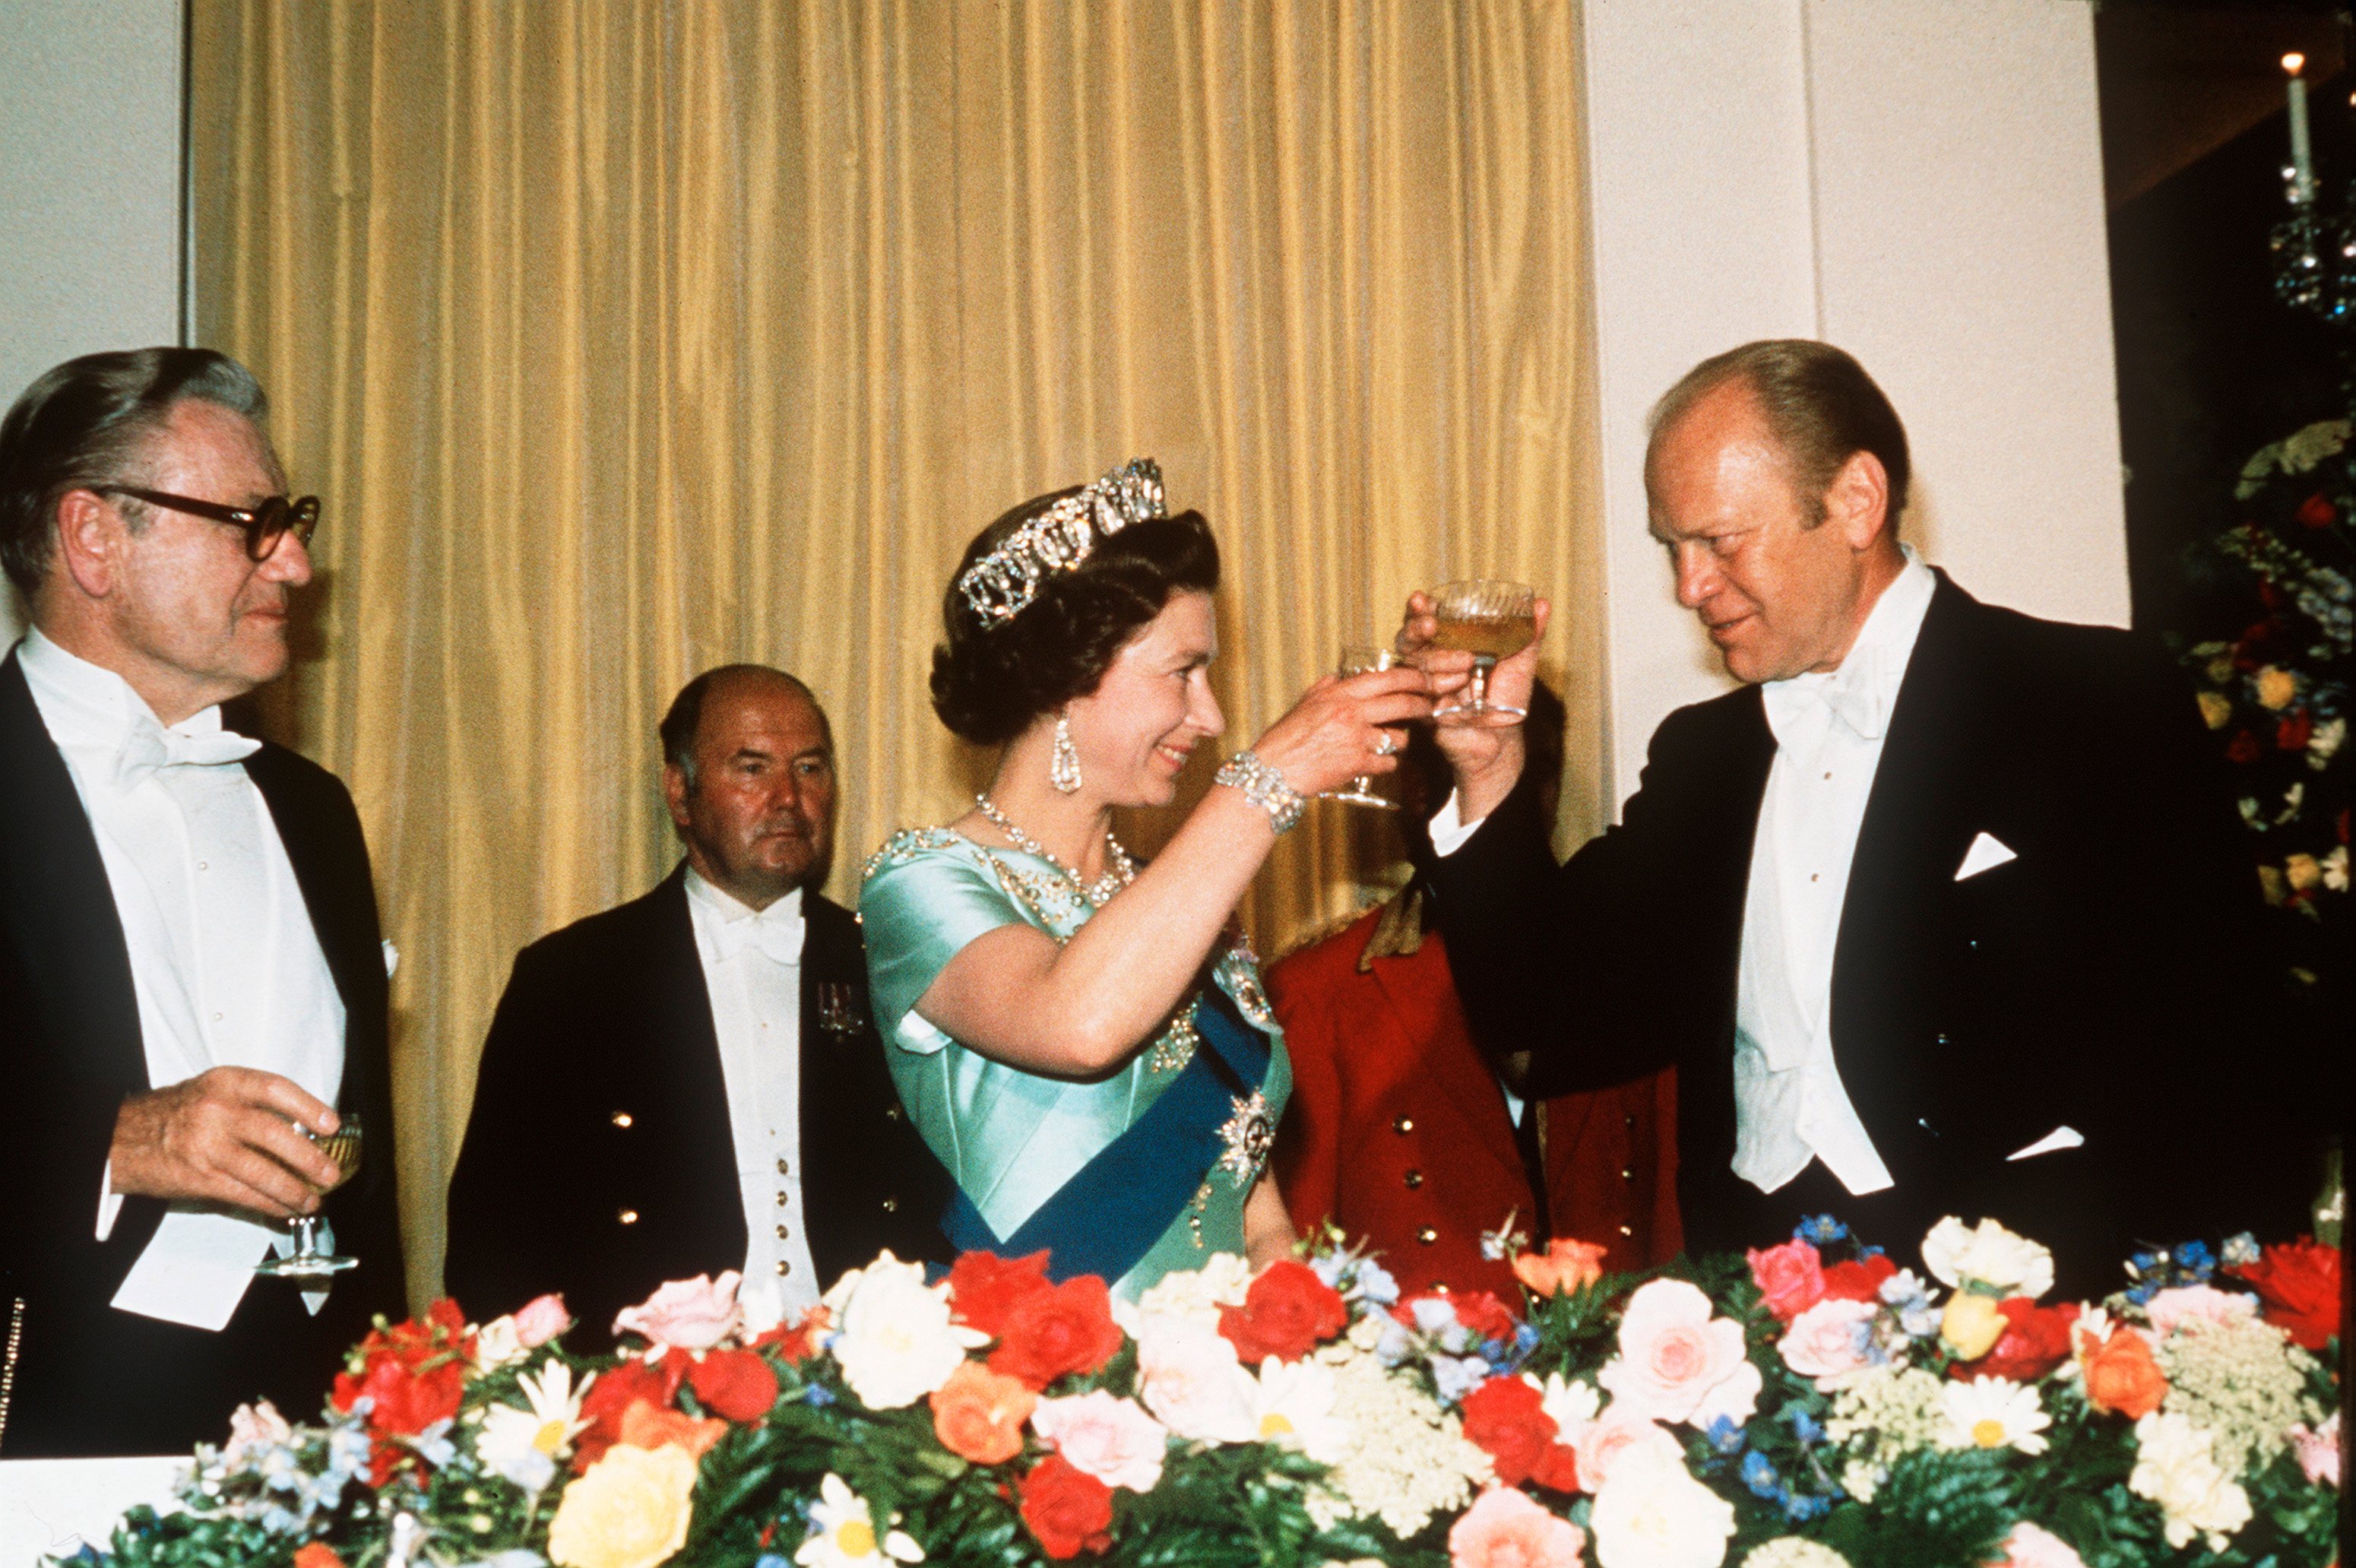 USA: President Ford toasts Queen Elizabeth II at an American Bicentennial dinner